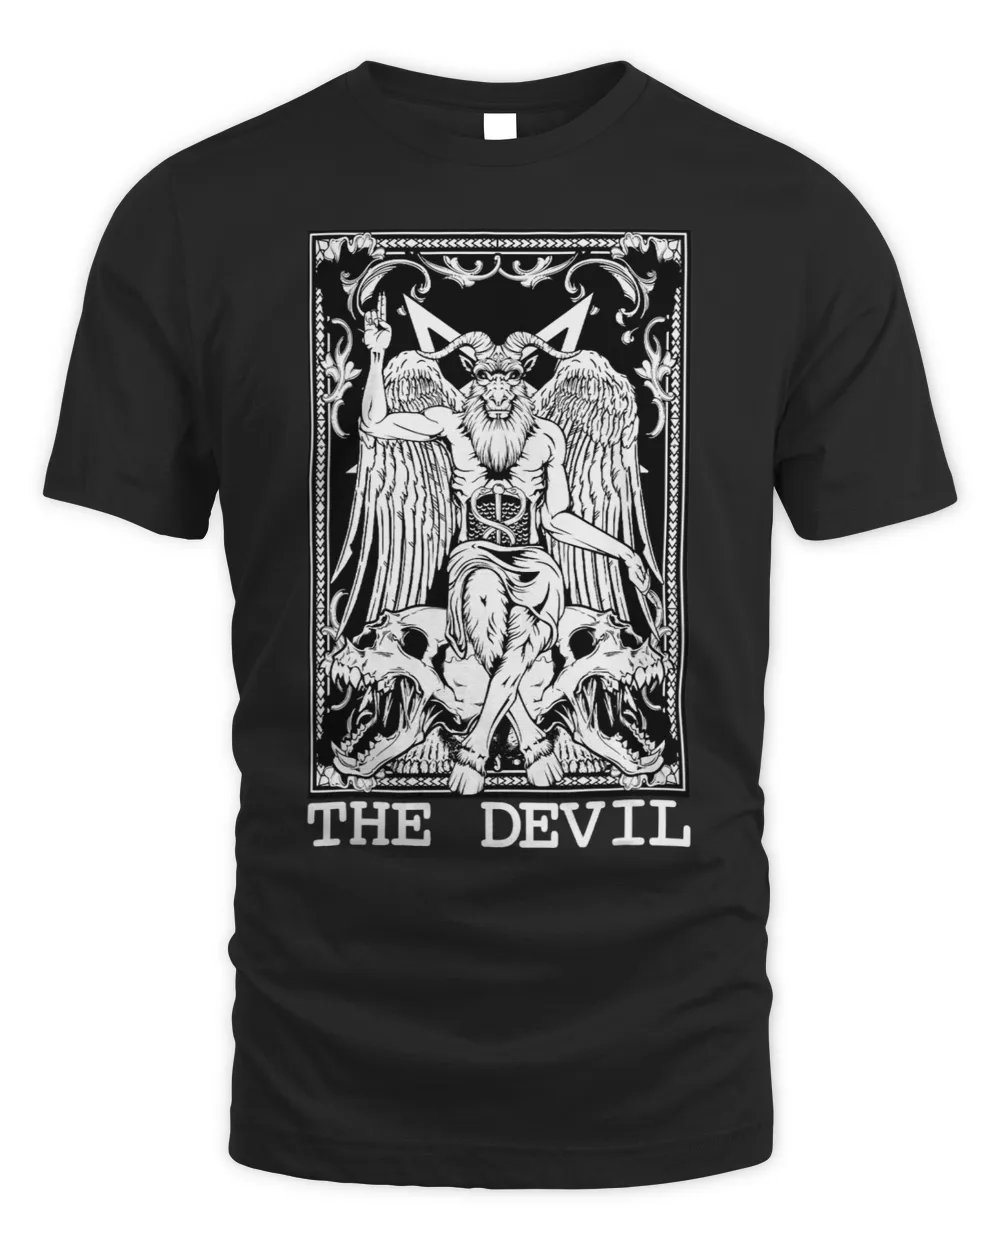 The Devil Horned Demon Tarot Card Witchy Satanic Occult Tee